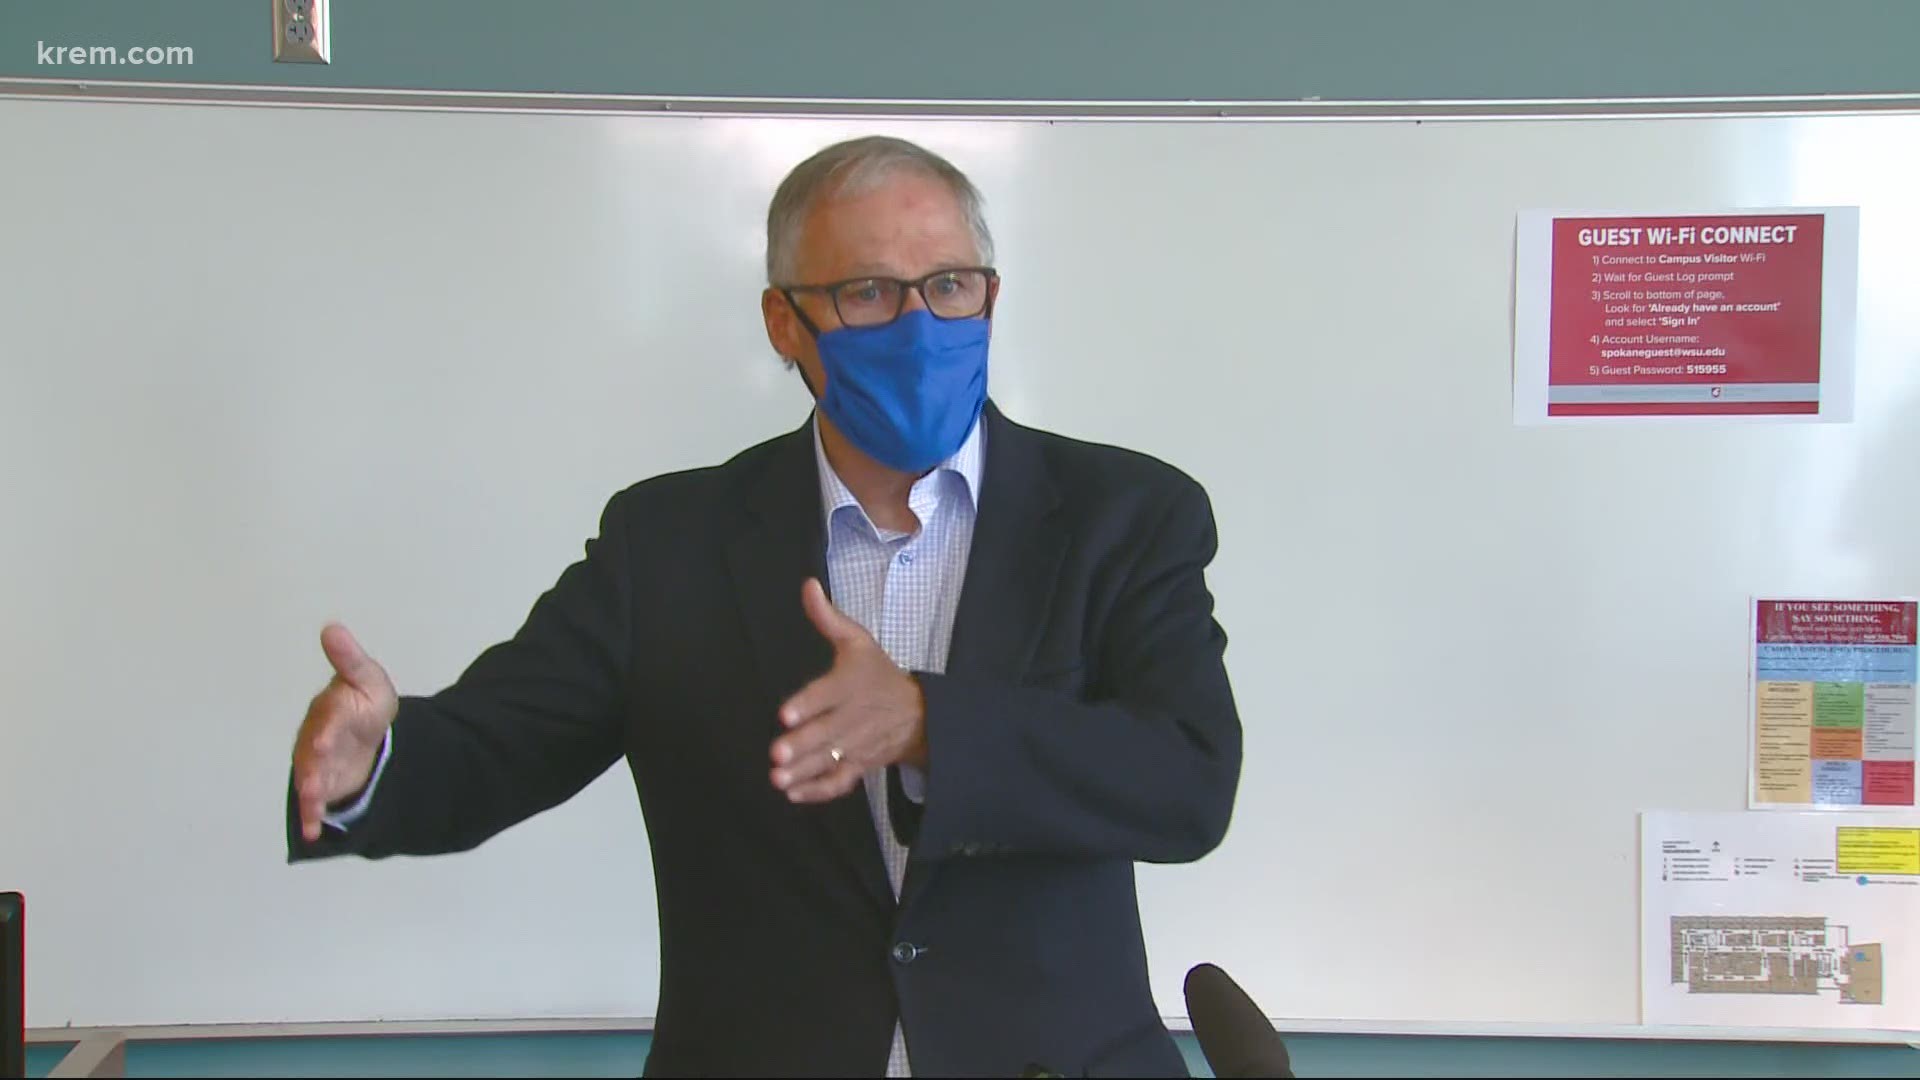 Inslee says he is concerned about the situation in Spokane, but that the city can recover if people wear masks.